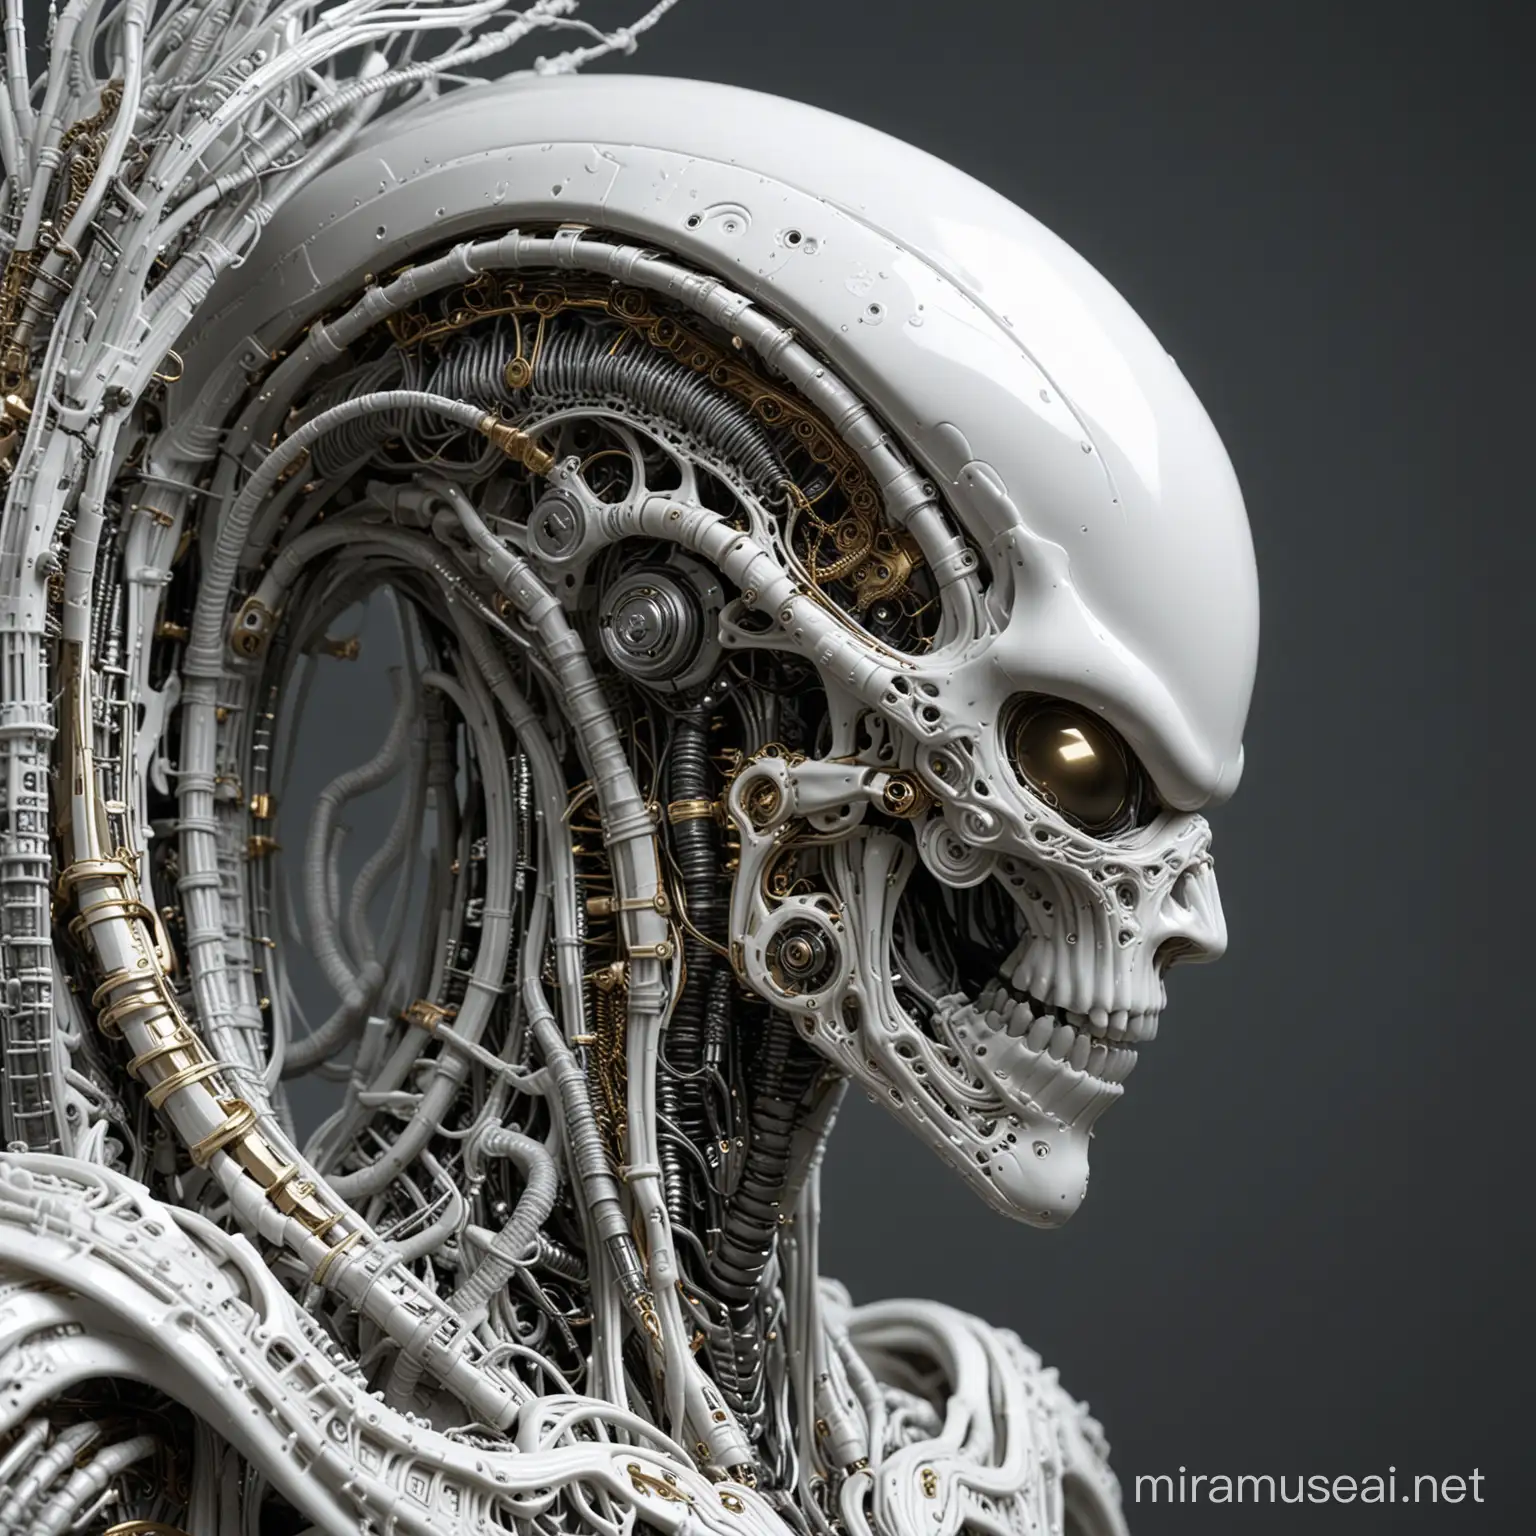 Elegant Xenomorph Cyborg Profile Sculpture with Delicate Lace and Filigree Details